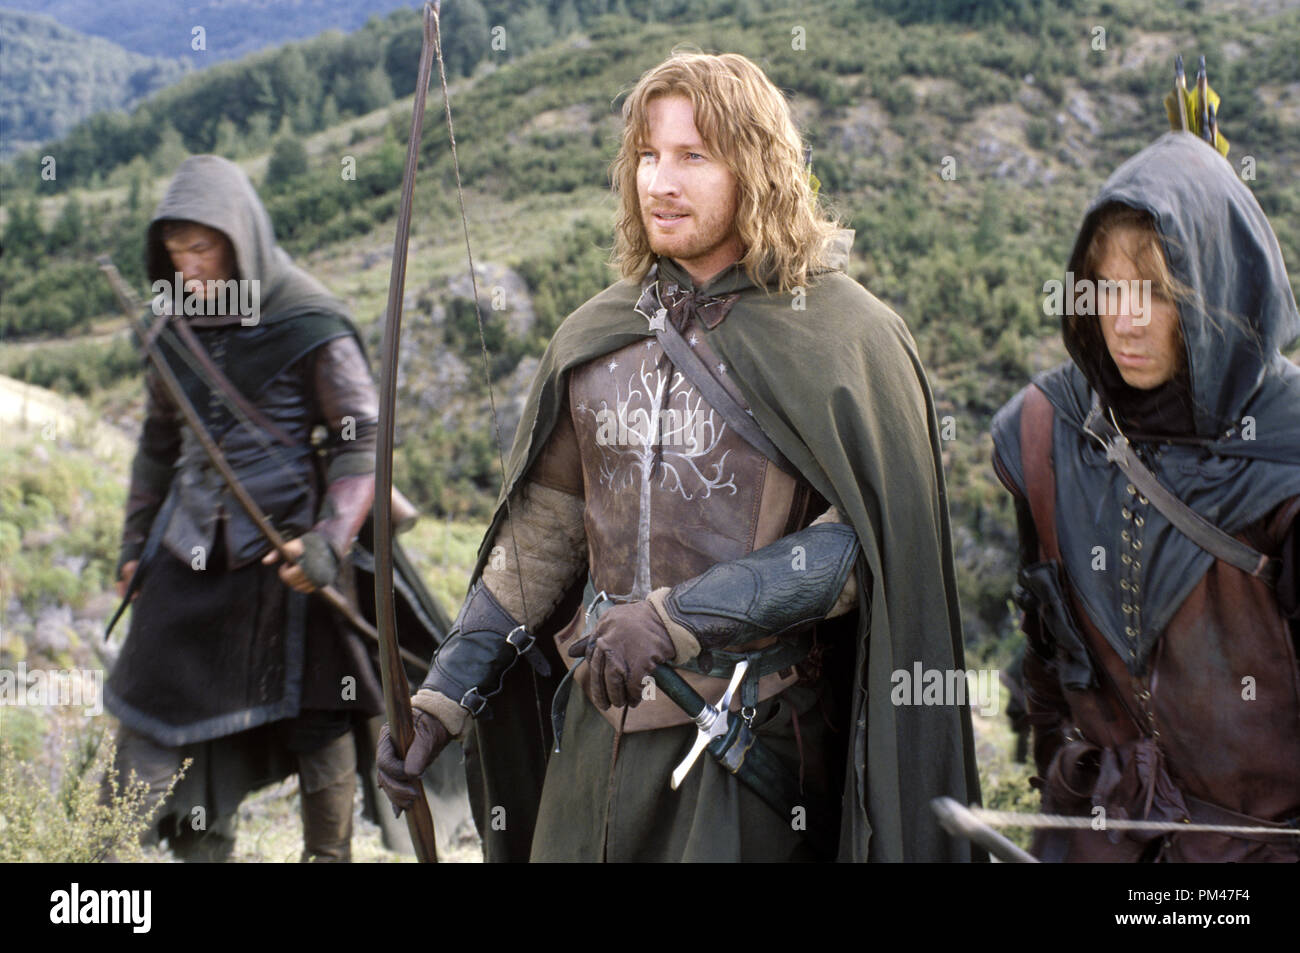 Newline Pictures Presents 'Lord of the Rings: The Two Towers' David Wenham © 2002 New Line Photo by Pierre Vinet Stock Photo